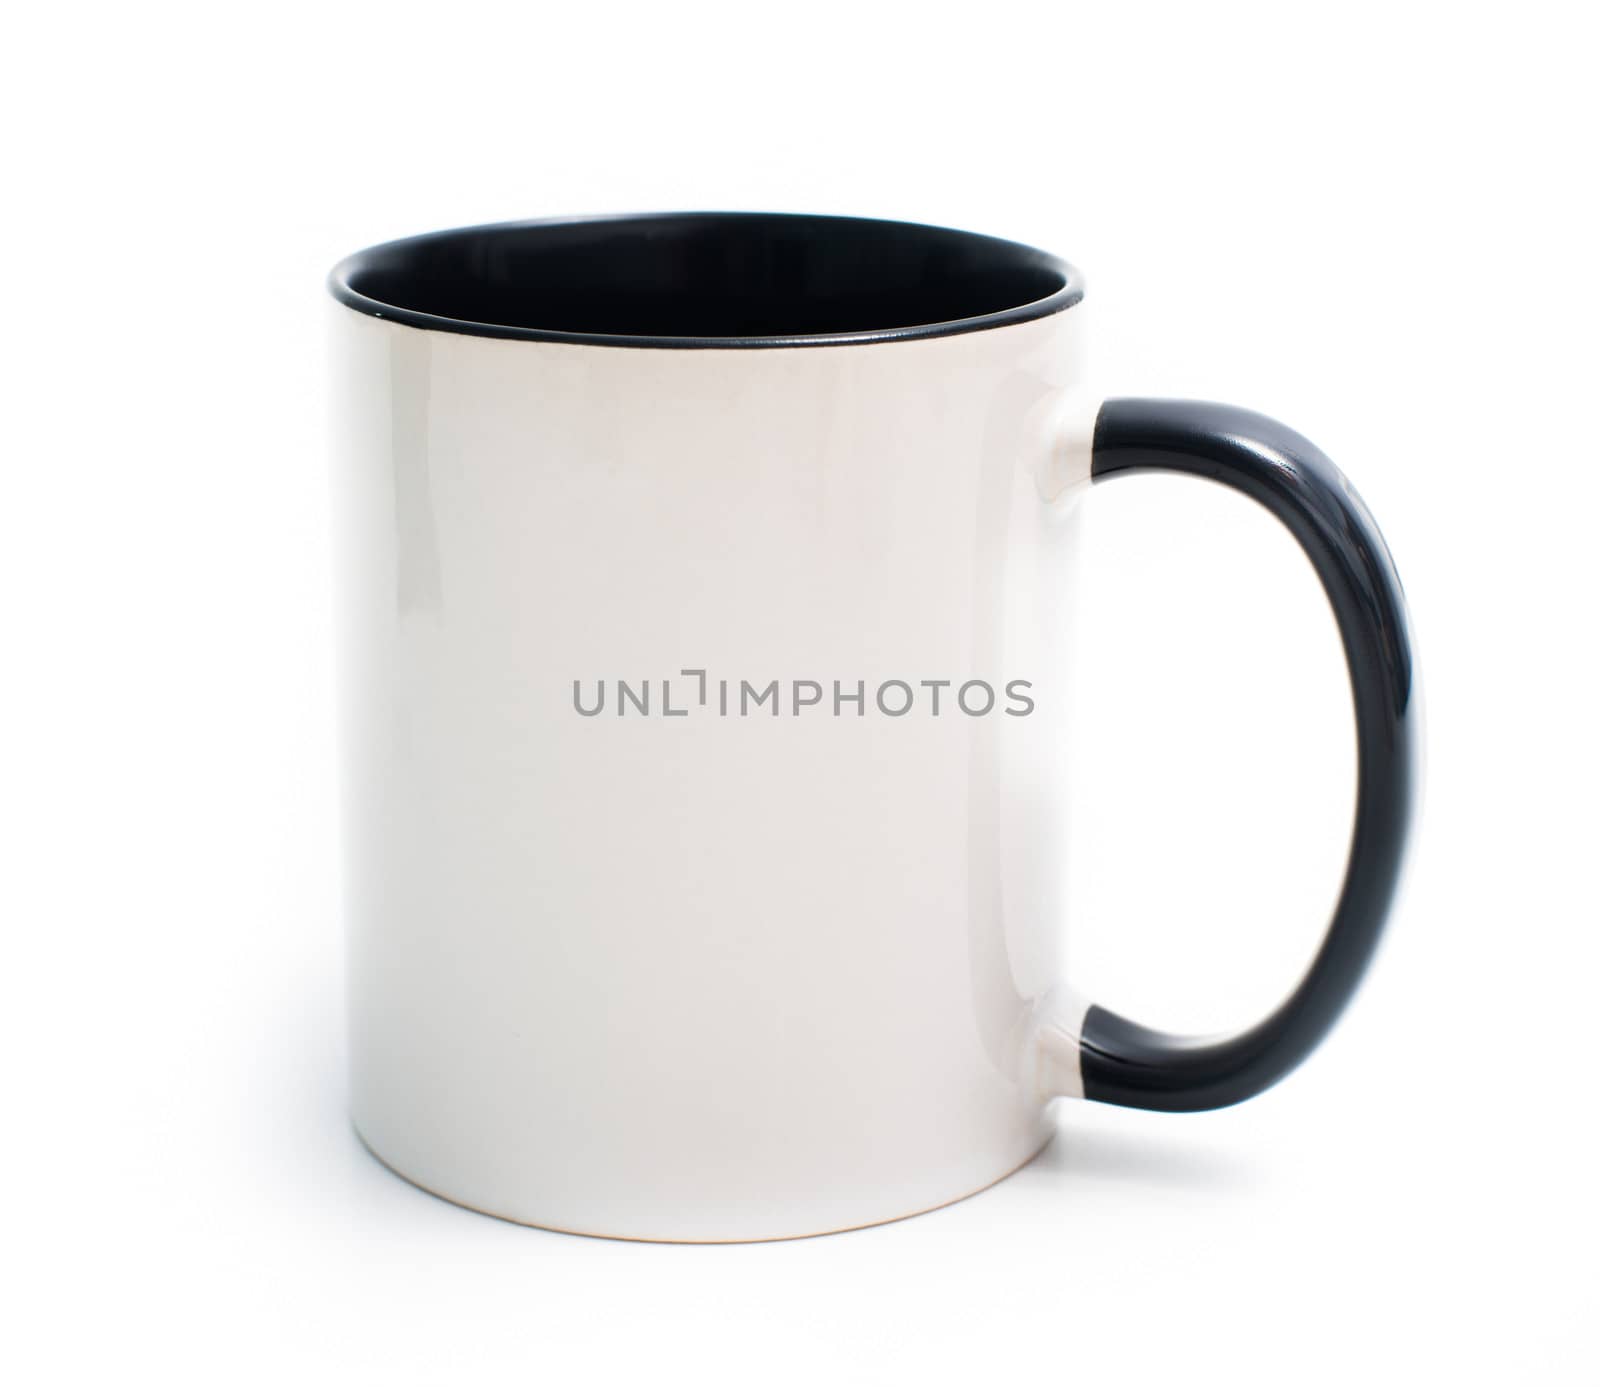 white mug with a black handle and an inner surface isolated on white background